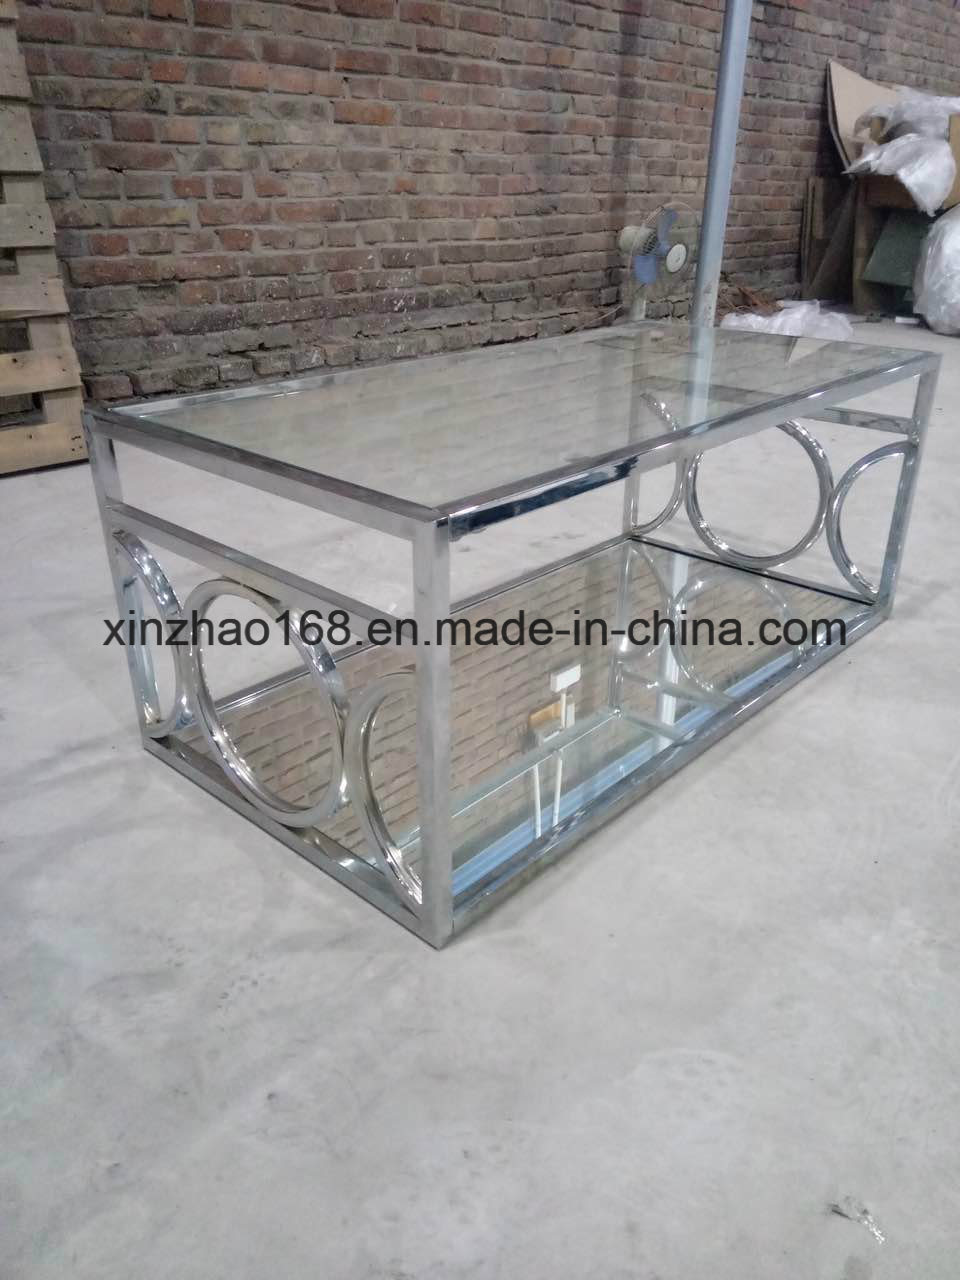 Xz-282 Gold Stainless Steel Legs Tempered Glass Coffee Table